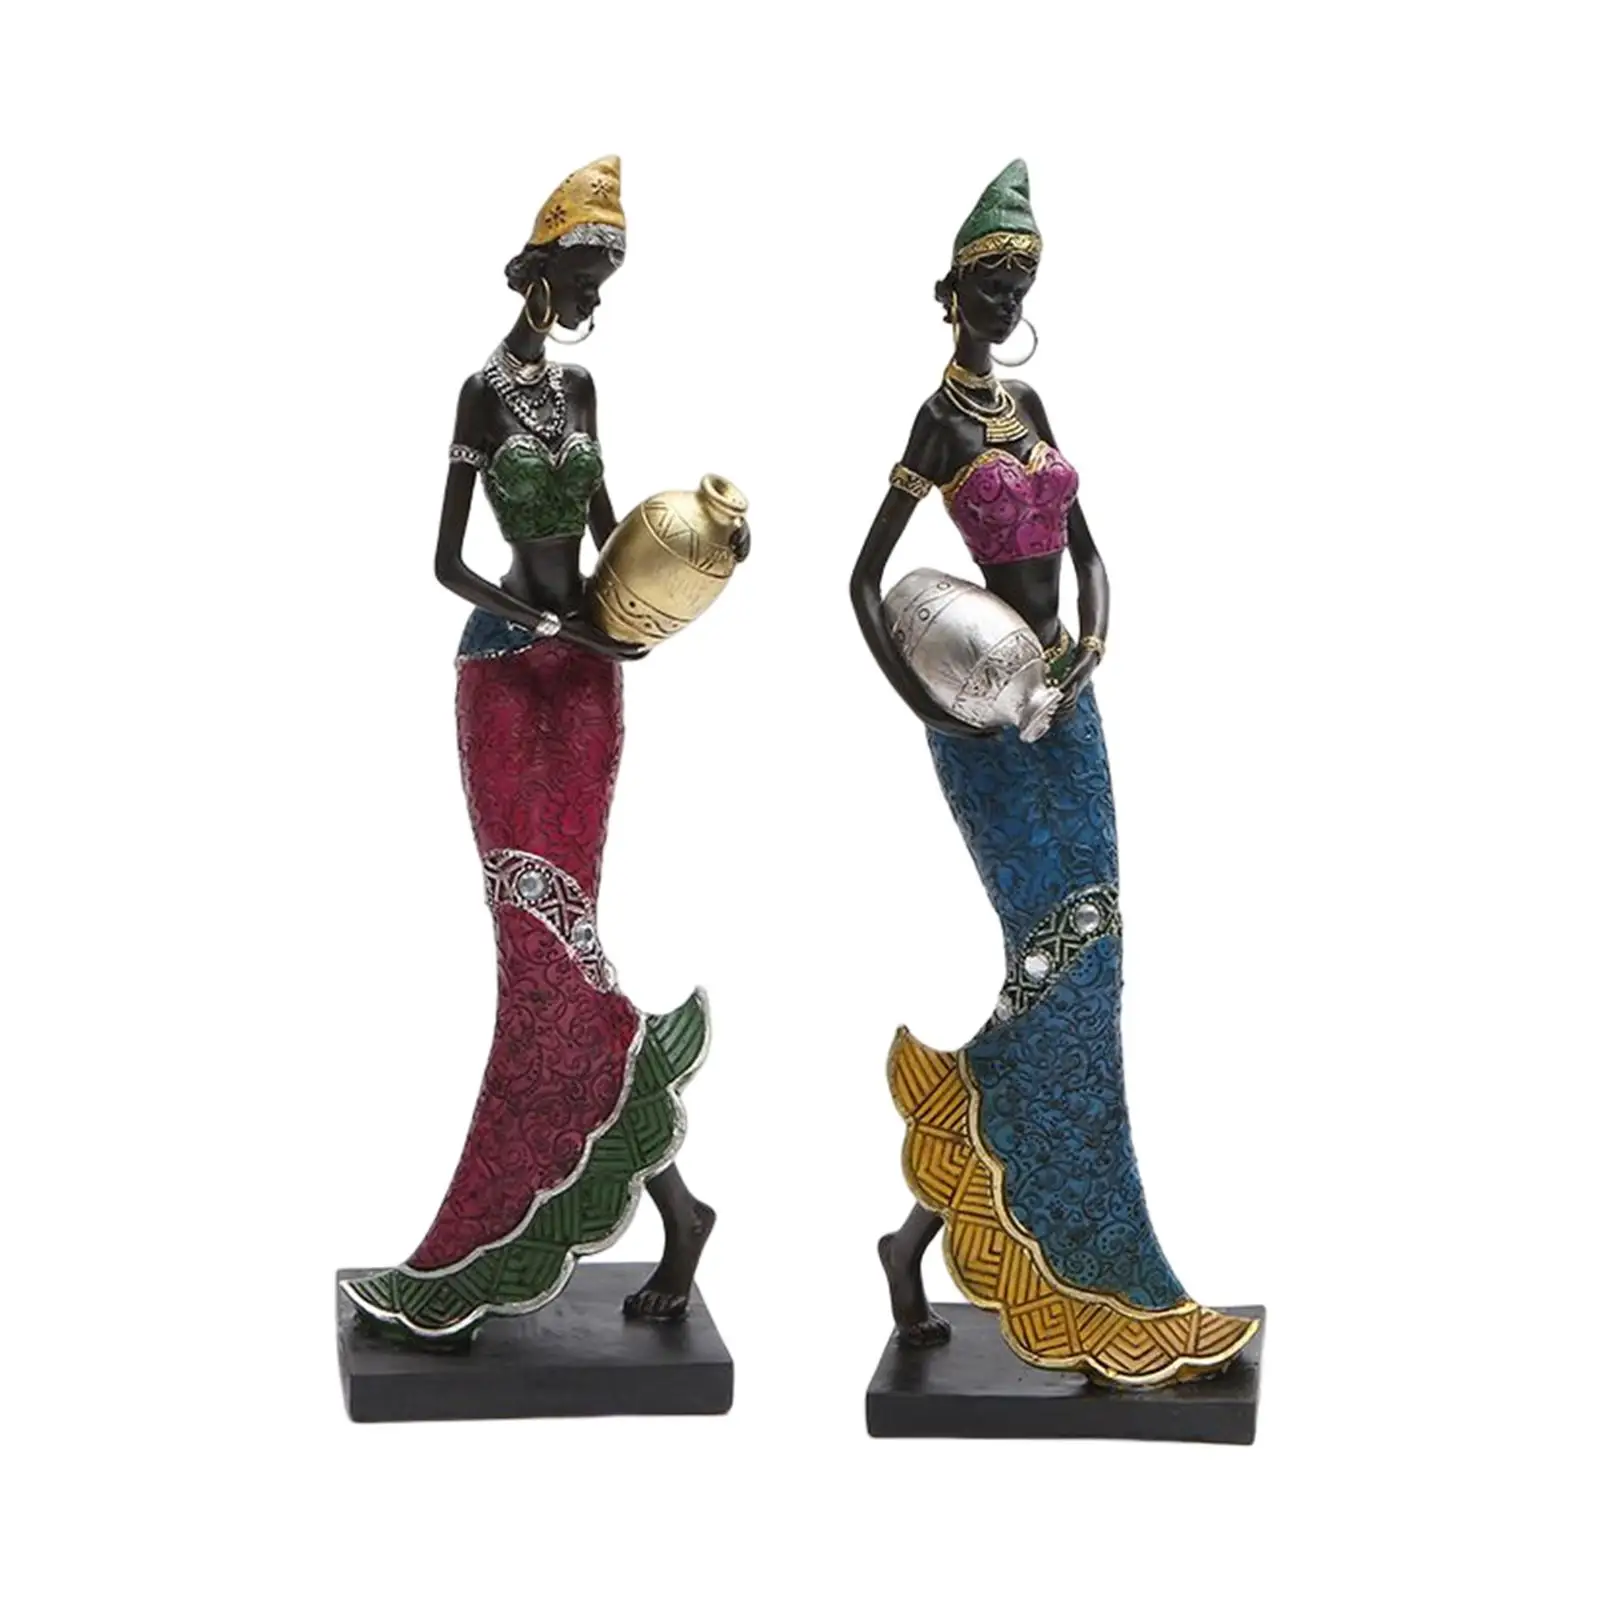 Minimalist African Figurine Decoration Exotic Tribal Girls Statue for Office